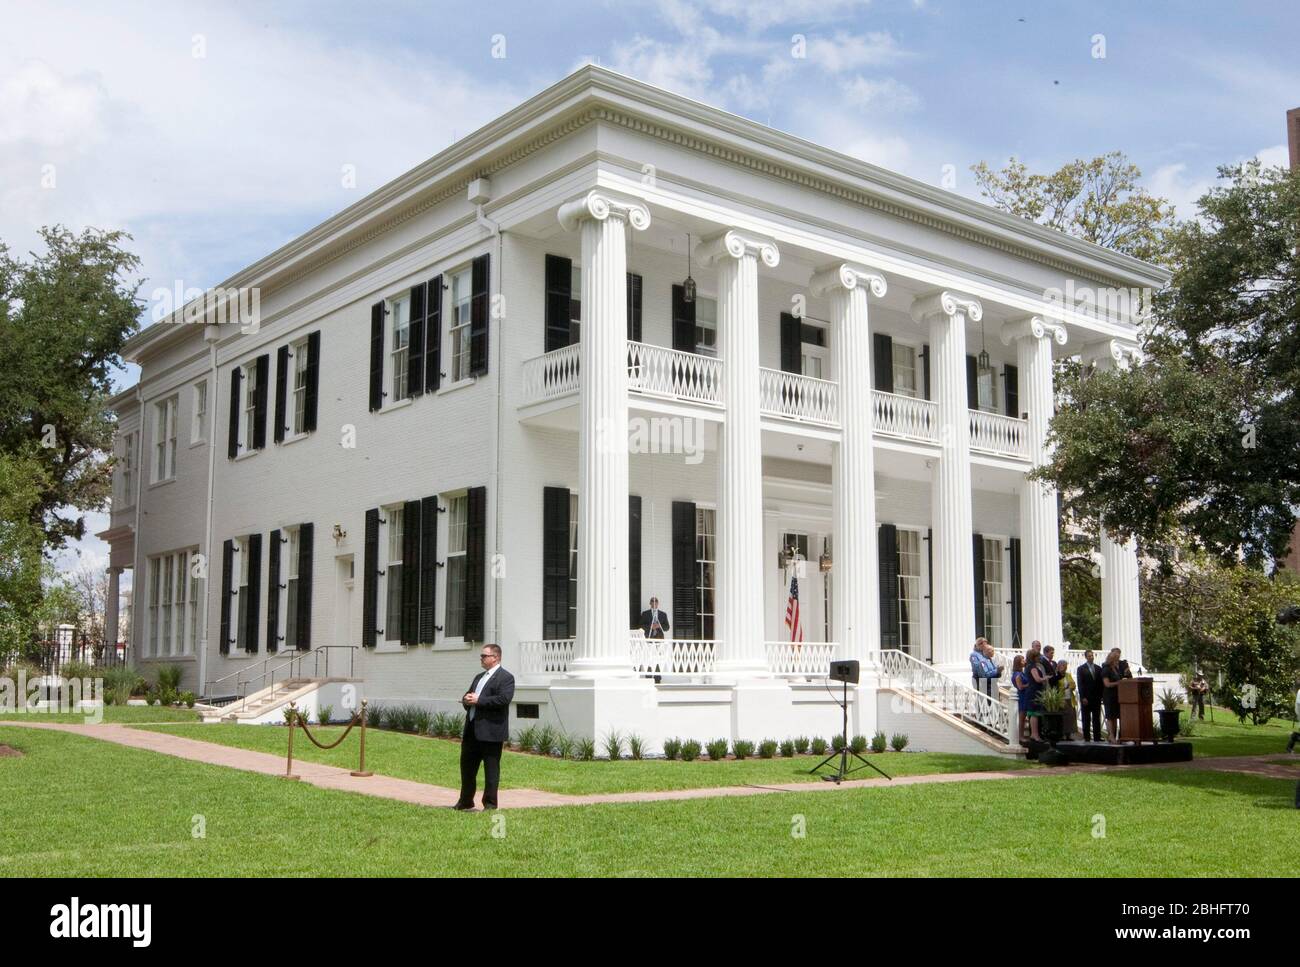 Austin, Texas USA, July 18, 2012: Press conference announcing that that the 156-year-old Texas Governor's Mansion has been fully restored. The Mansion was heavily damaged in June of 2008 after an unidentified arsonist threw a Molotov cocktail onto the front porch, resulting in a fire that gutted much of the historic building's interior and caused most of the roof to collapse. ©Marjorie Kamys Cotera/Daemmrich Photography Stock Photo